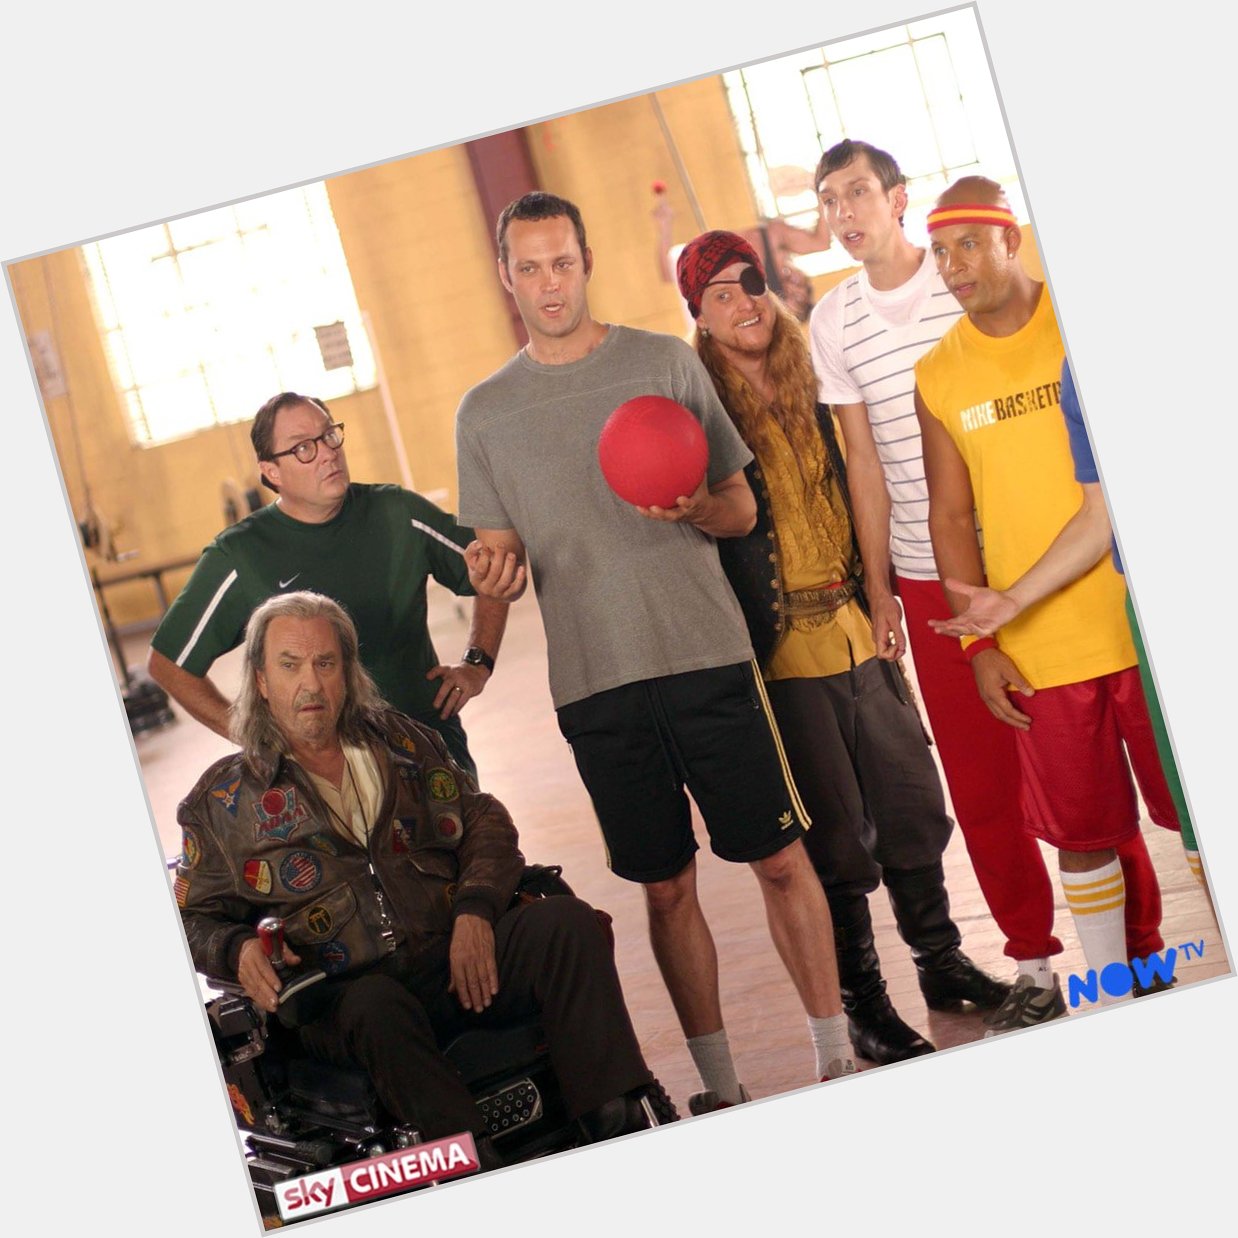 \"If you can dodge a wrench, you can dodge a ball!\"

Happy birthday to the legendary Rip Torn! 